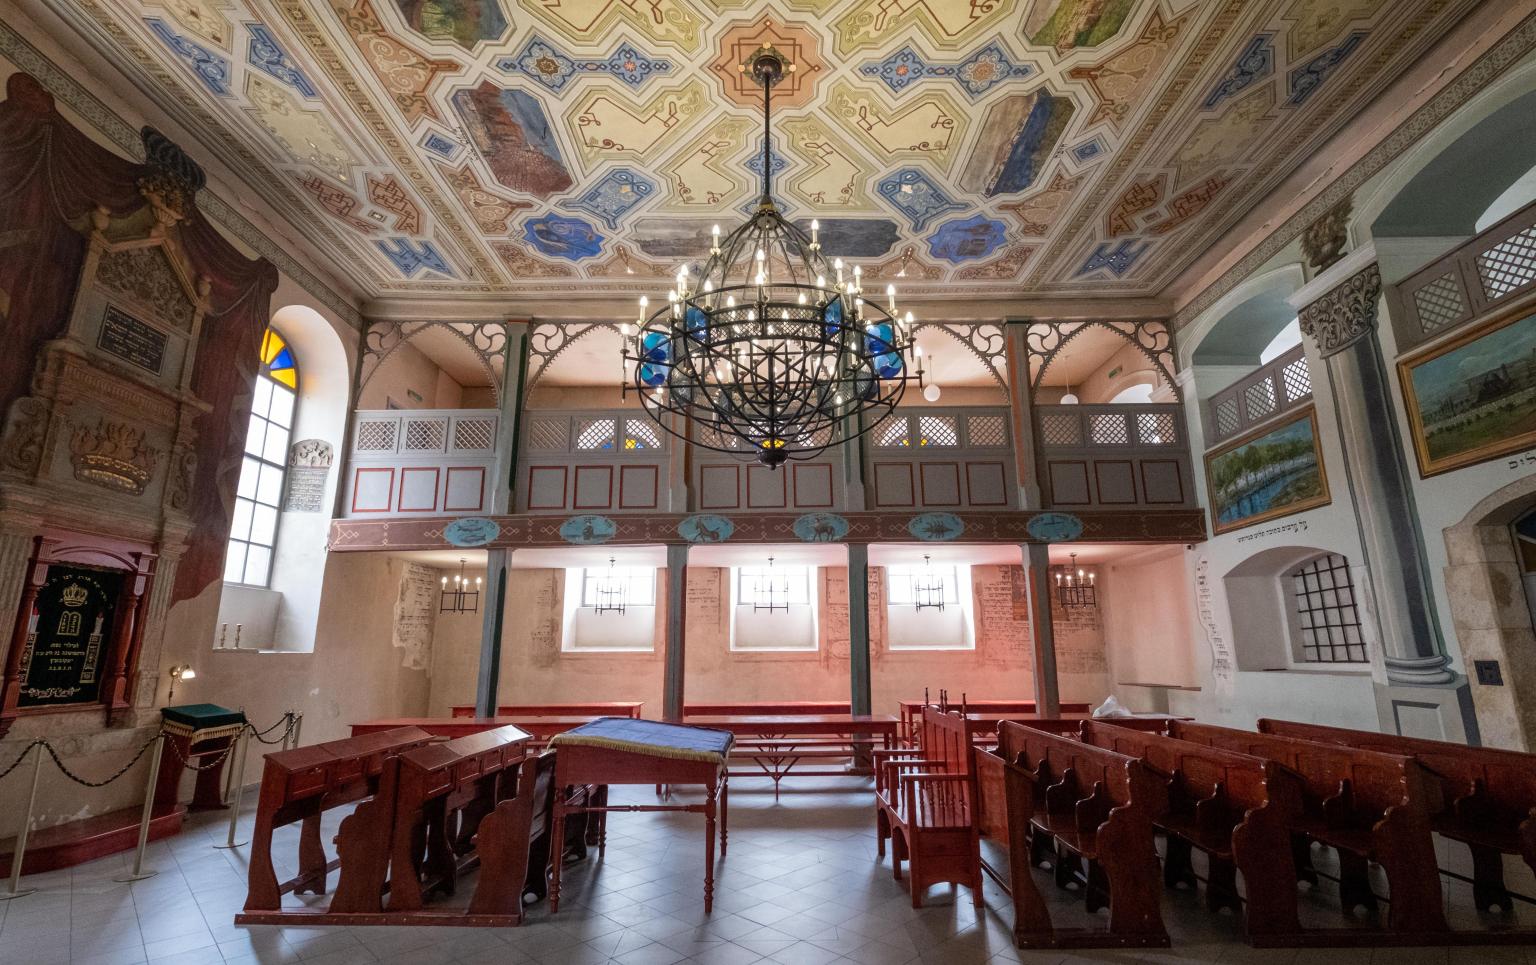 Photograph of interior room with second floor balcony, painted ceiling, rows of pews, and Torah ark on left wall. 